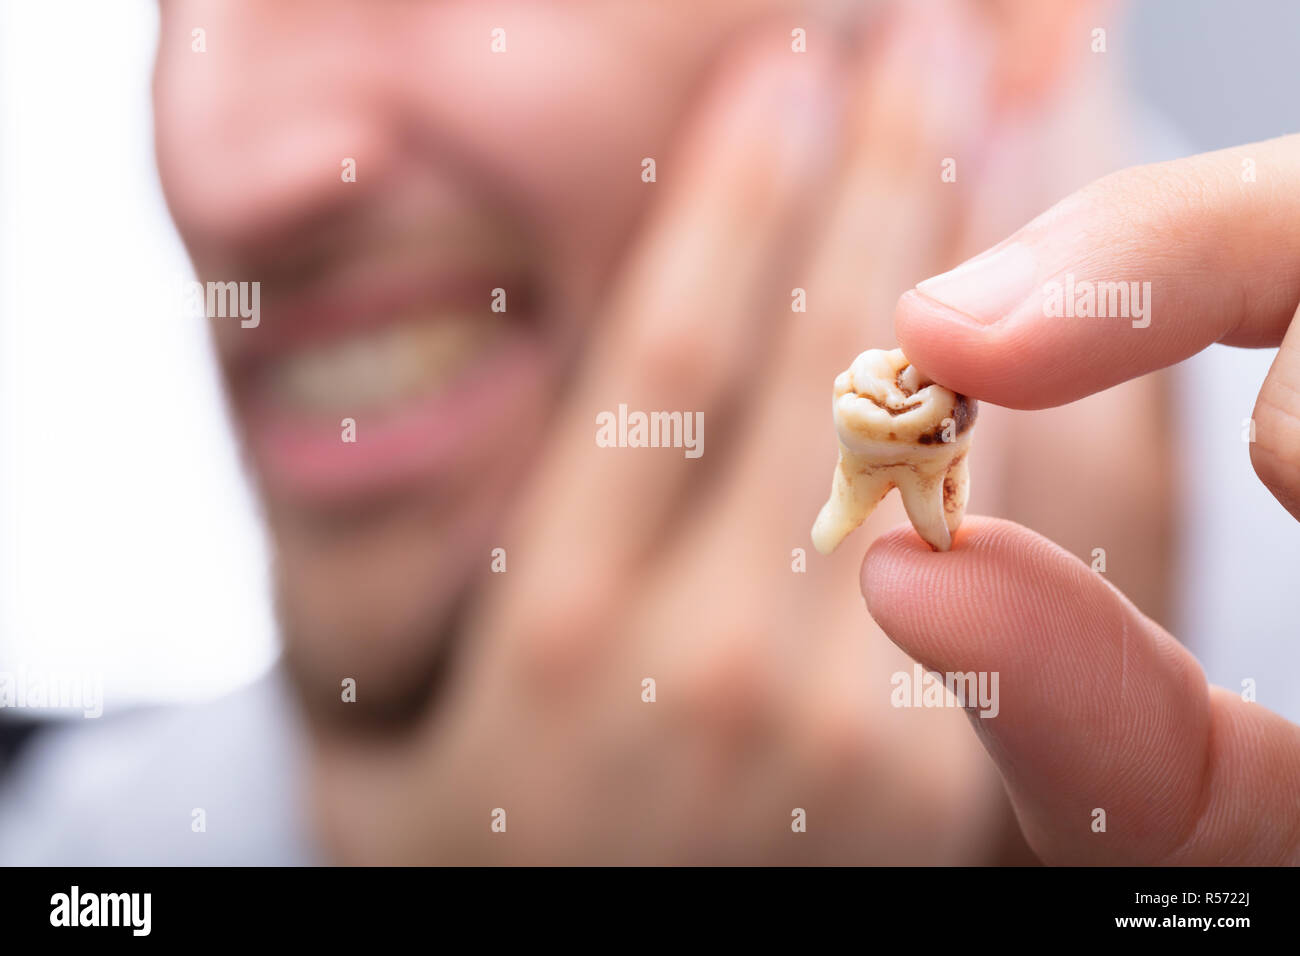 Close-up Of A Man's Hand Holding Decayed Tooth Stock Photo